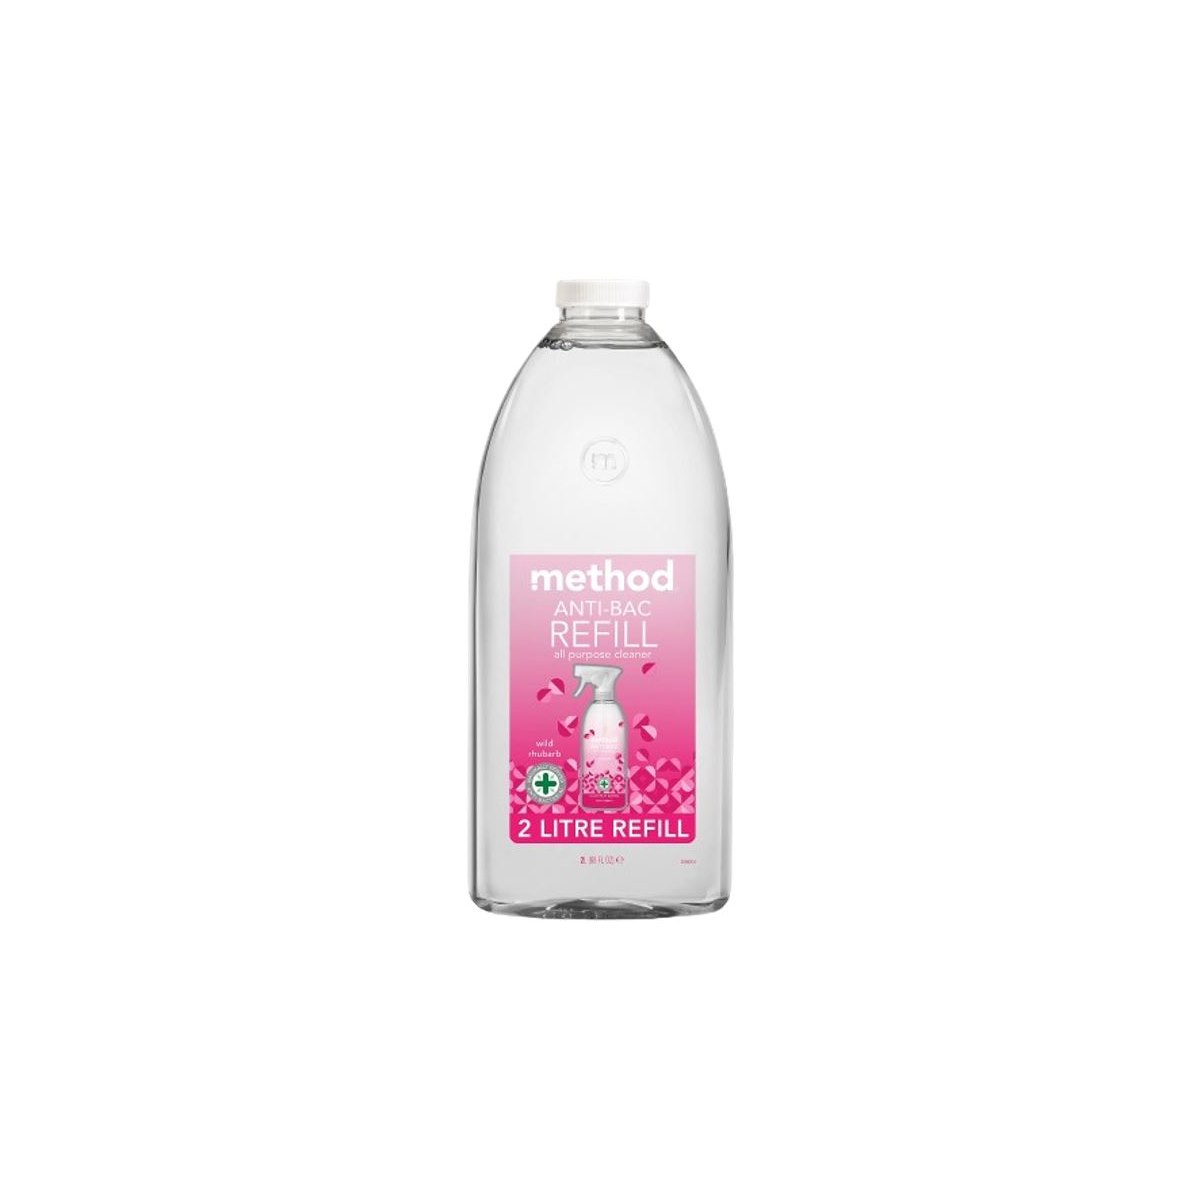 Method Anti Bac All Purpose Cleaner REFILL 2L